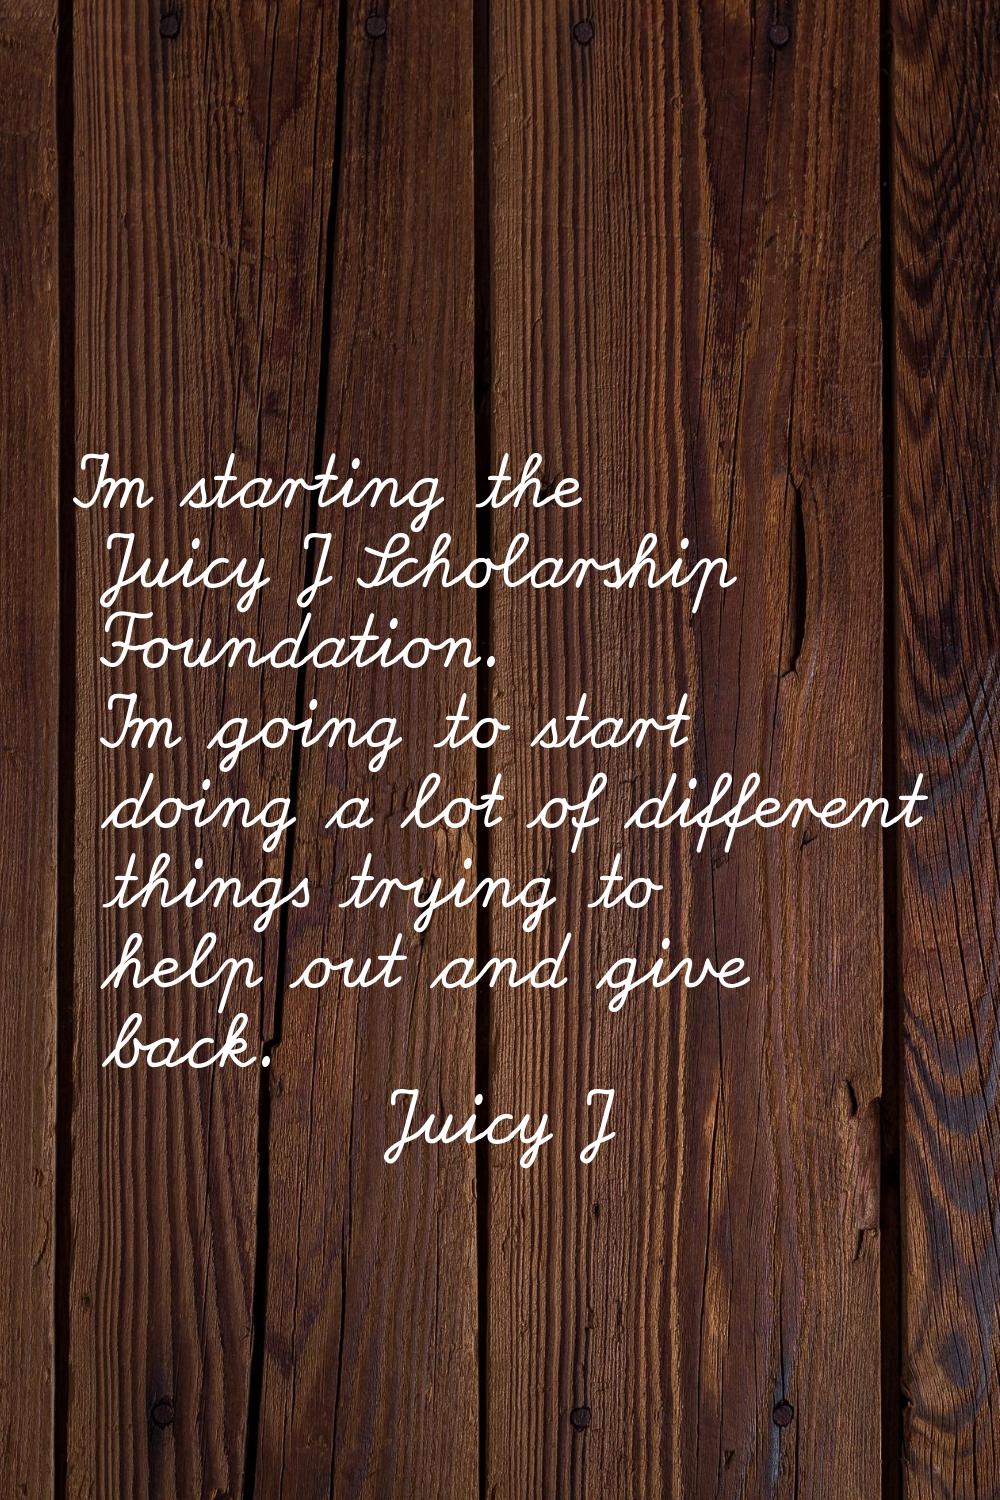 I'm starting the Juicy J Scholarship Foundation. I'm going to start doing a lot of different things